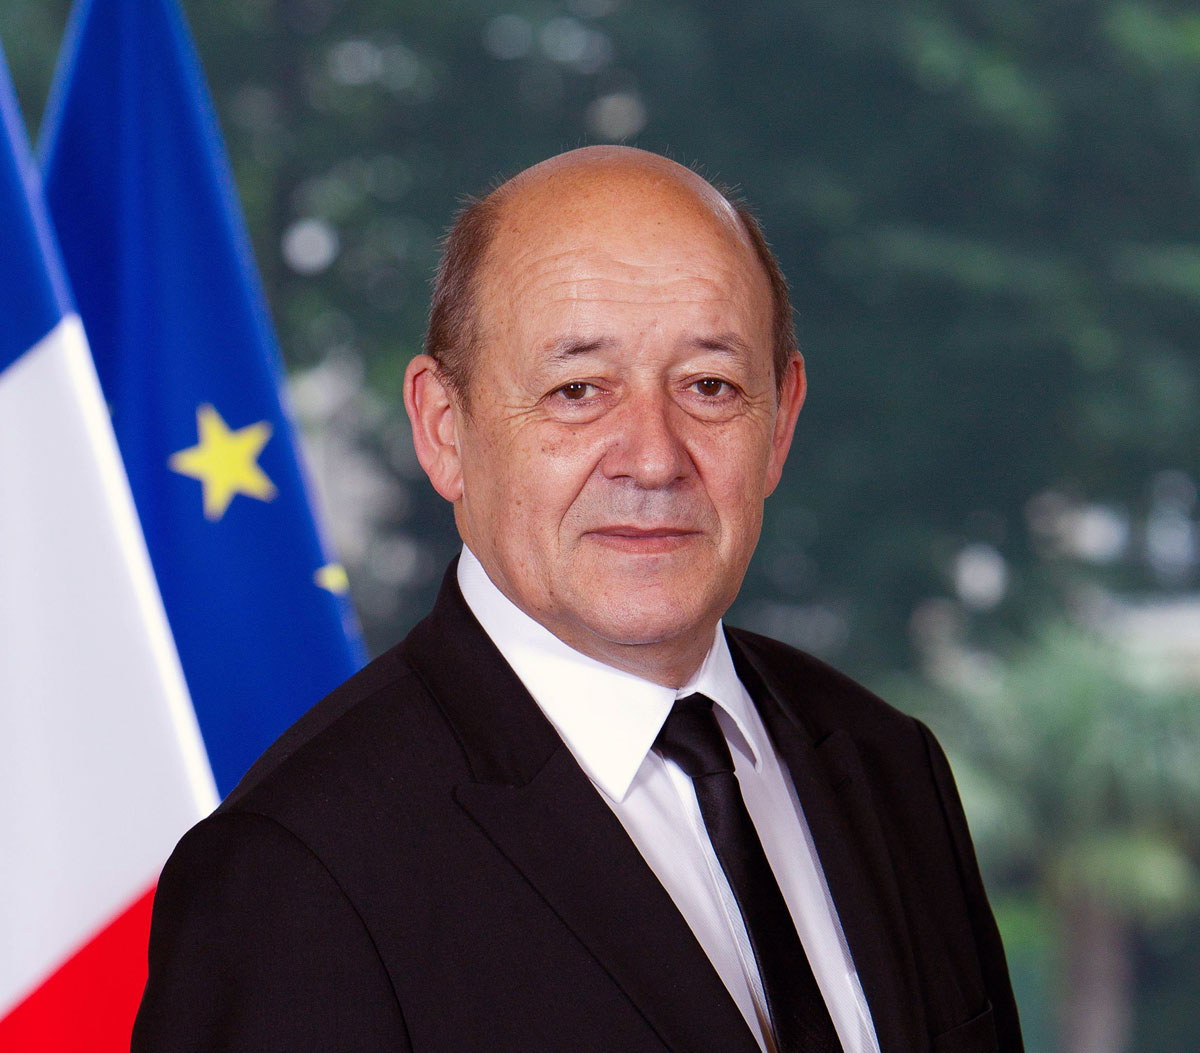 Defence Minister Jean-Yves Le Drian